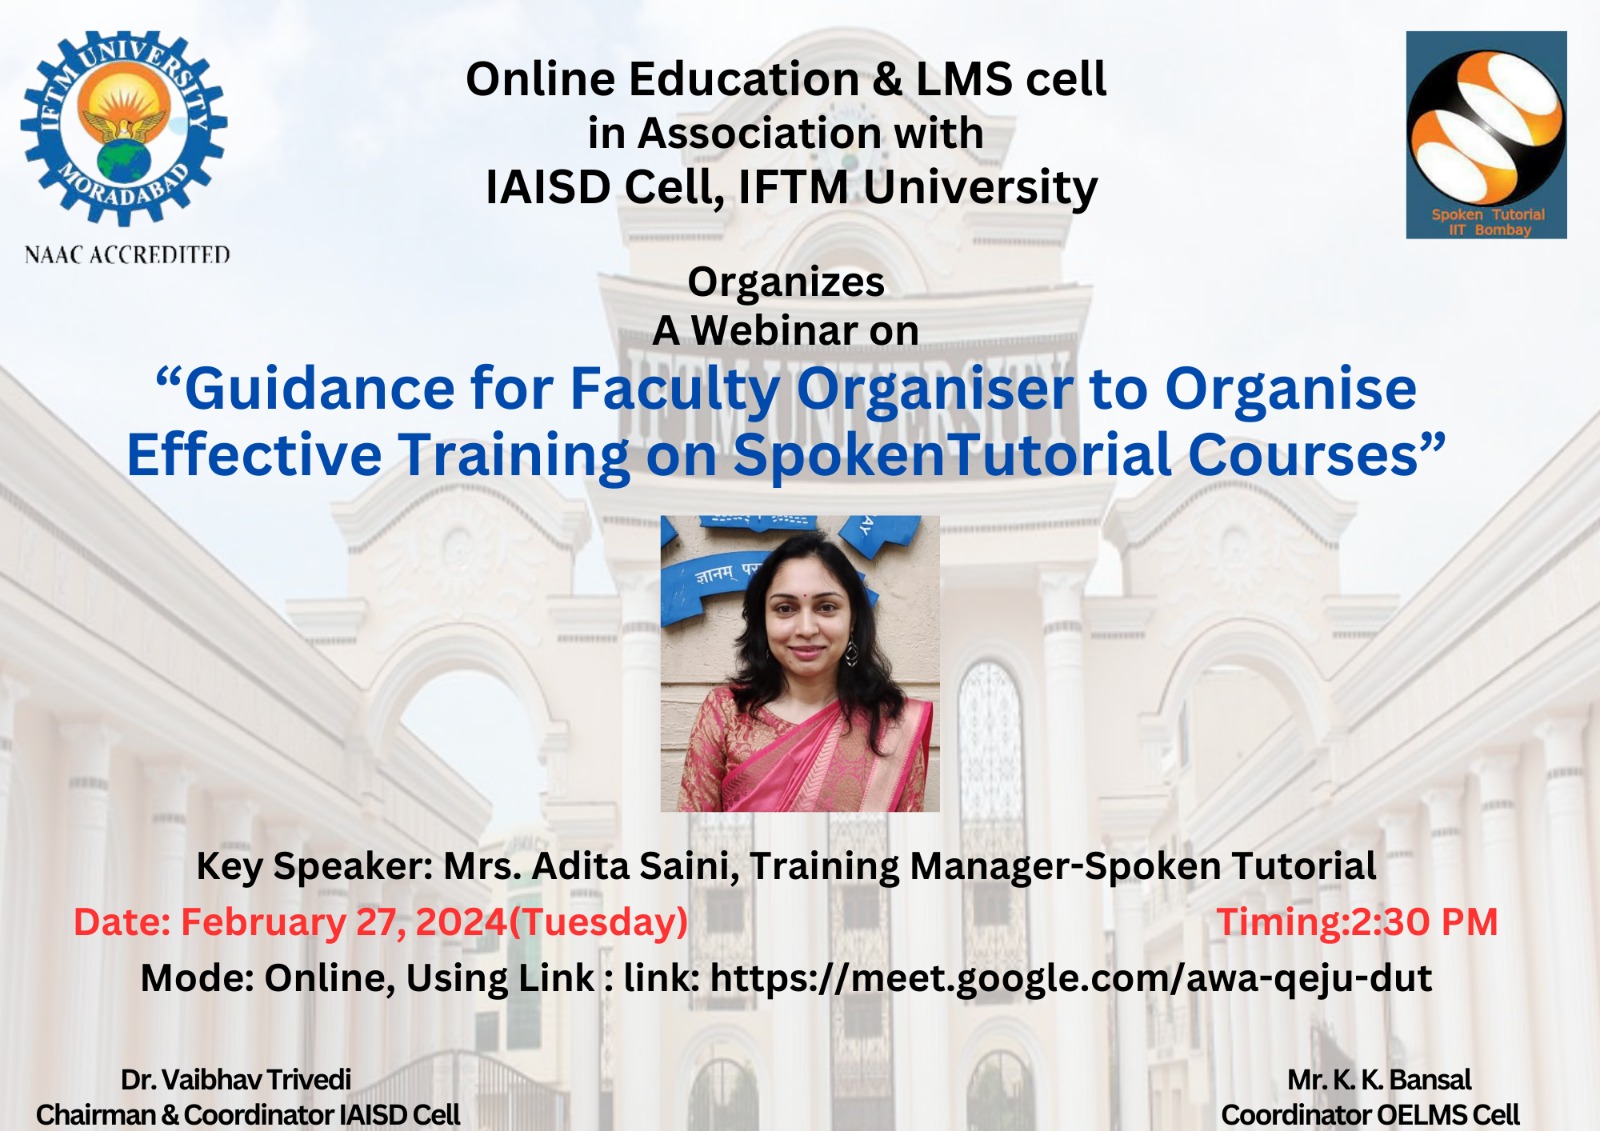 A webinar on Guidance for Faculty Organizer to Organize Effective Training on Spoken Tutorial Courses